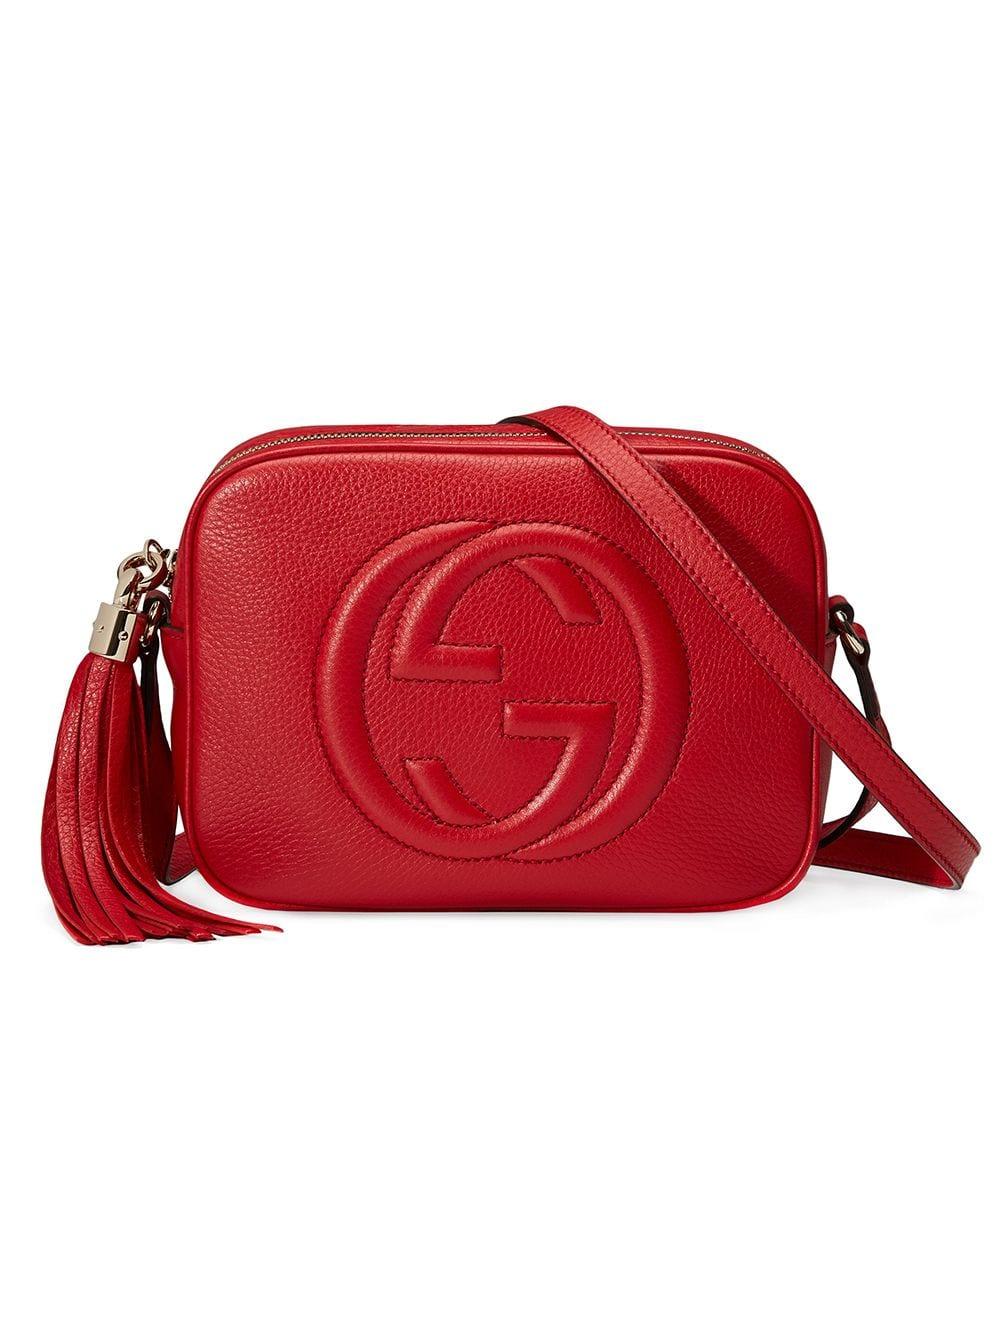 Soho Disco Small Leather Shoulder Bag in Red - Lyst